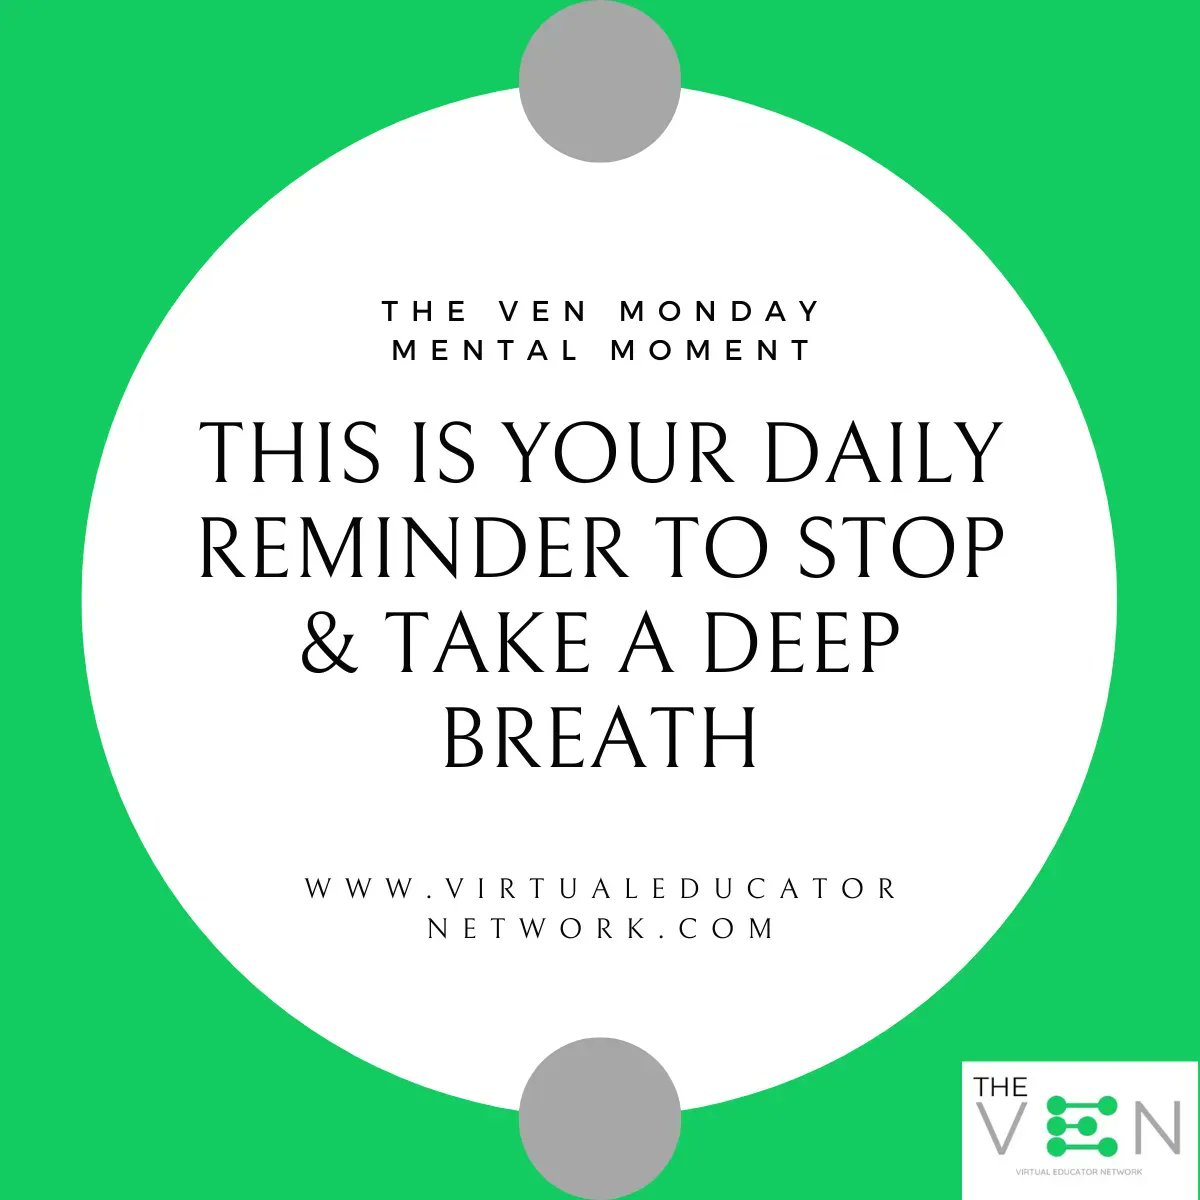 The saying 'Stop and take a deep breath' is great advice for so many reasons! Deep breathing reduces stress, lowers blood pressure, and helps you to relax.#TheVEN #virtualeducatornetwork #TheVENmentalhealthmoment #selfcaretips #selfcarematters #SelfCareIsHealthcare #selfcare101